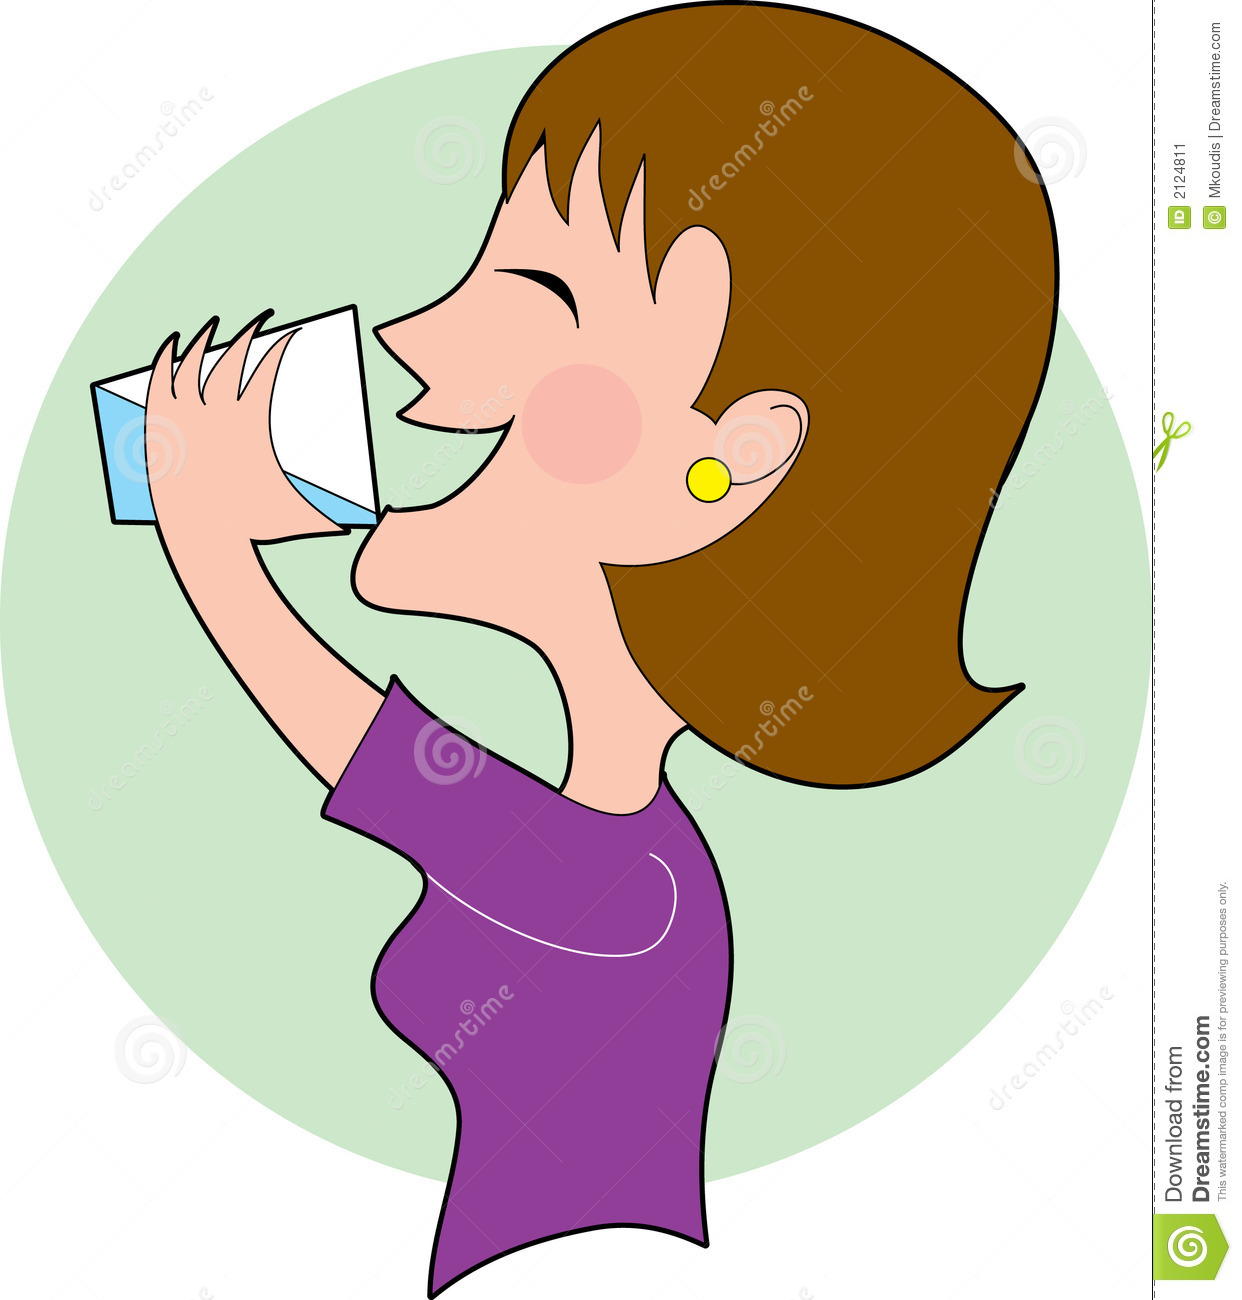 Drinking water clipart free.